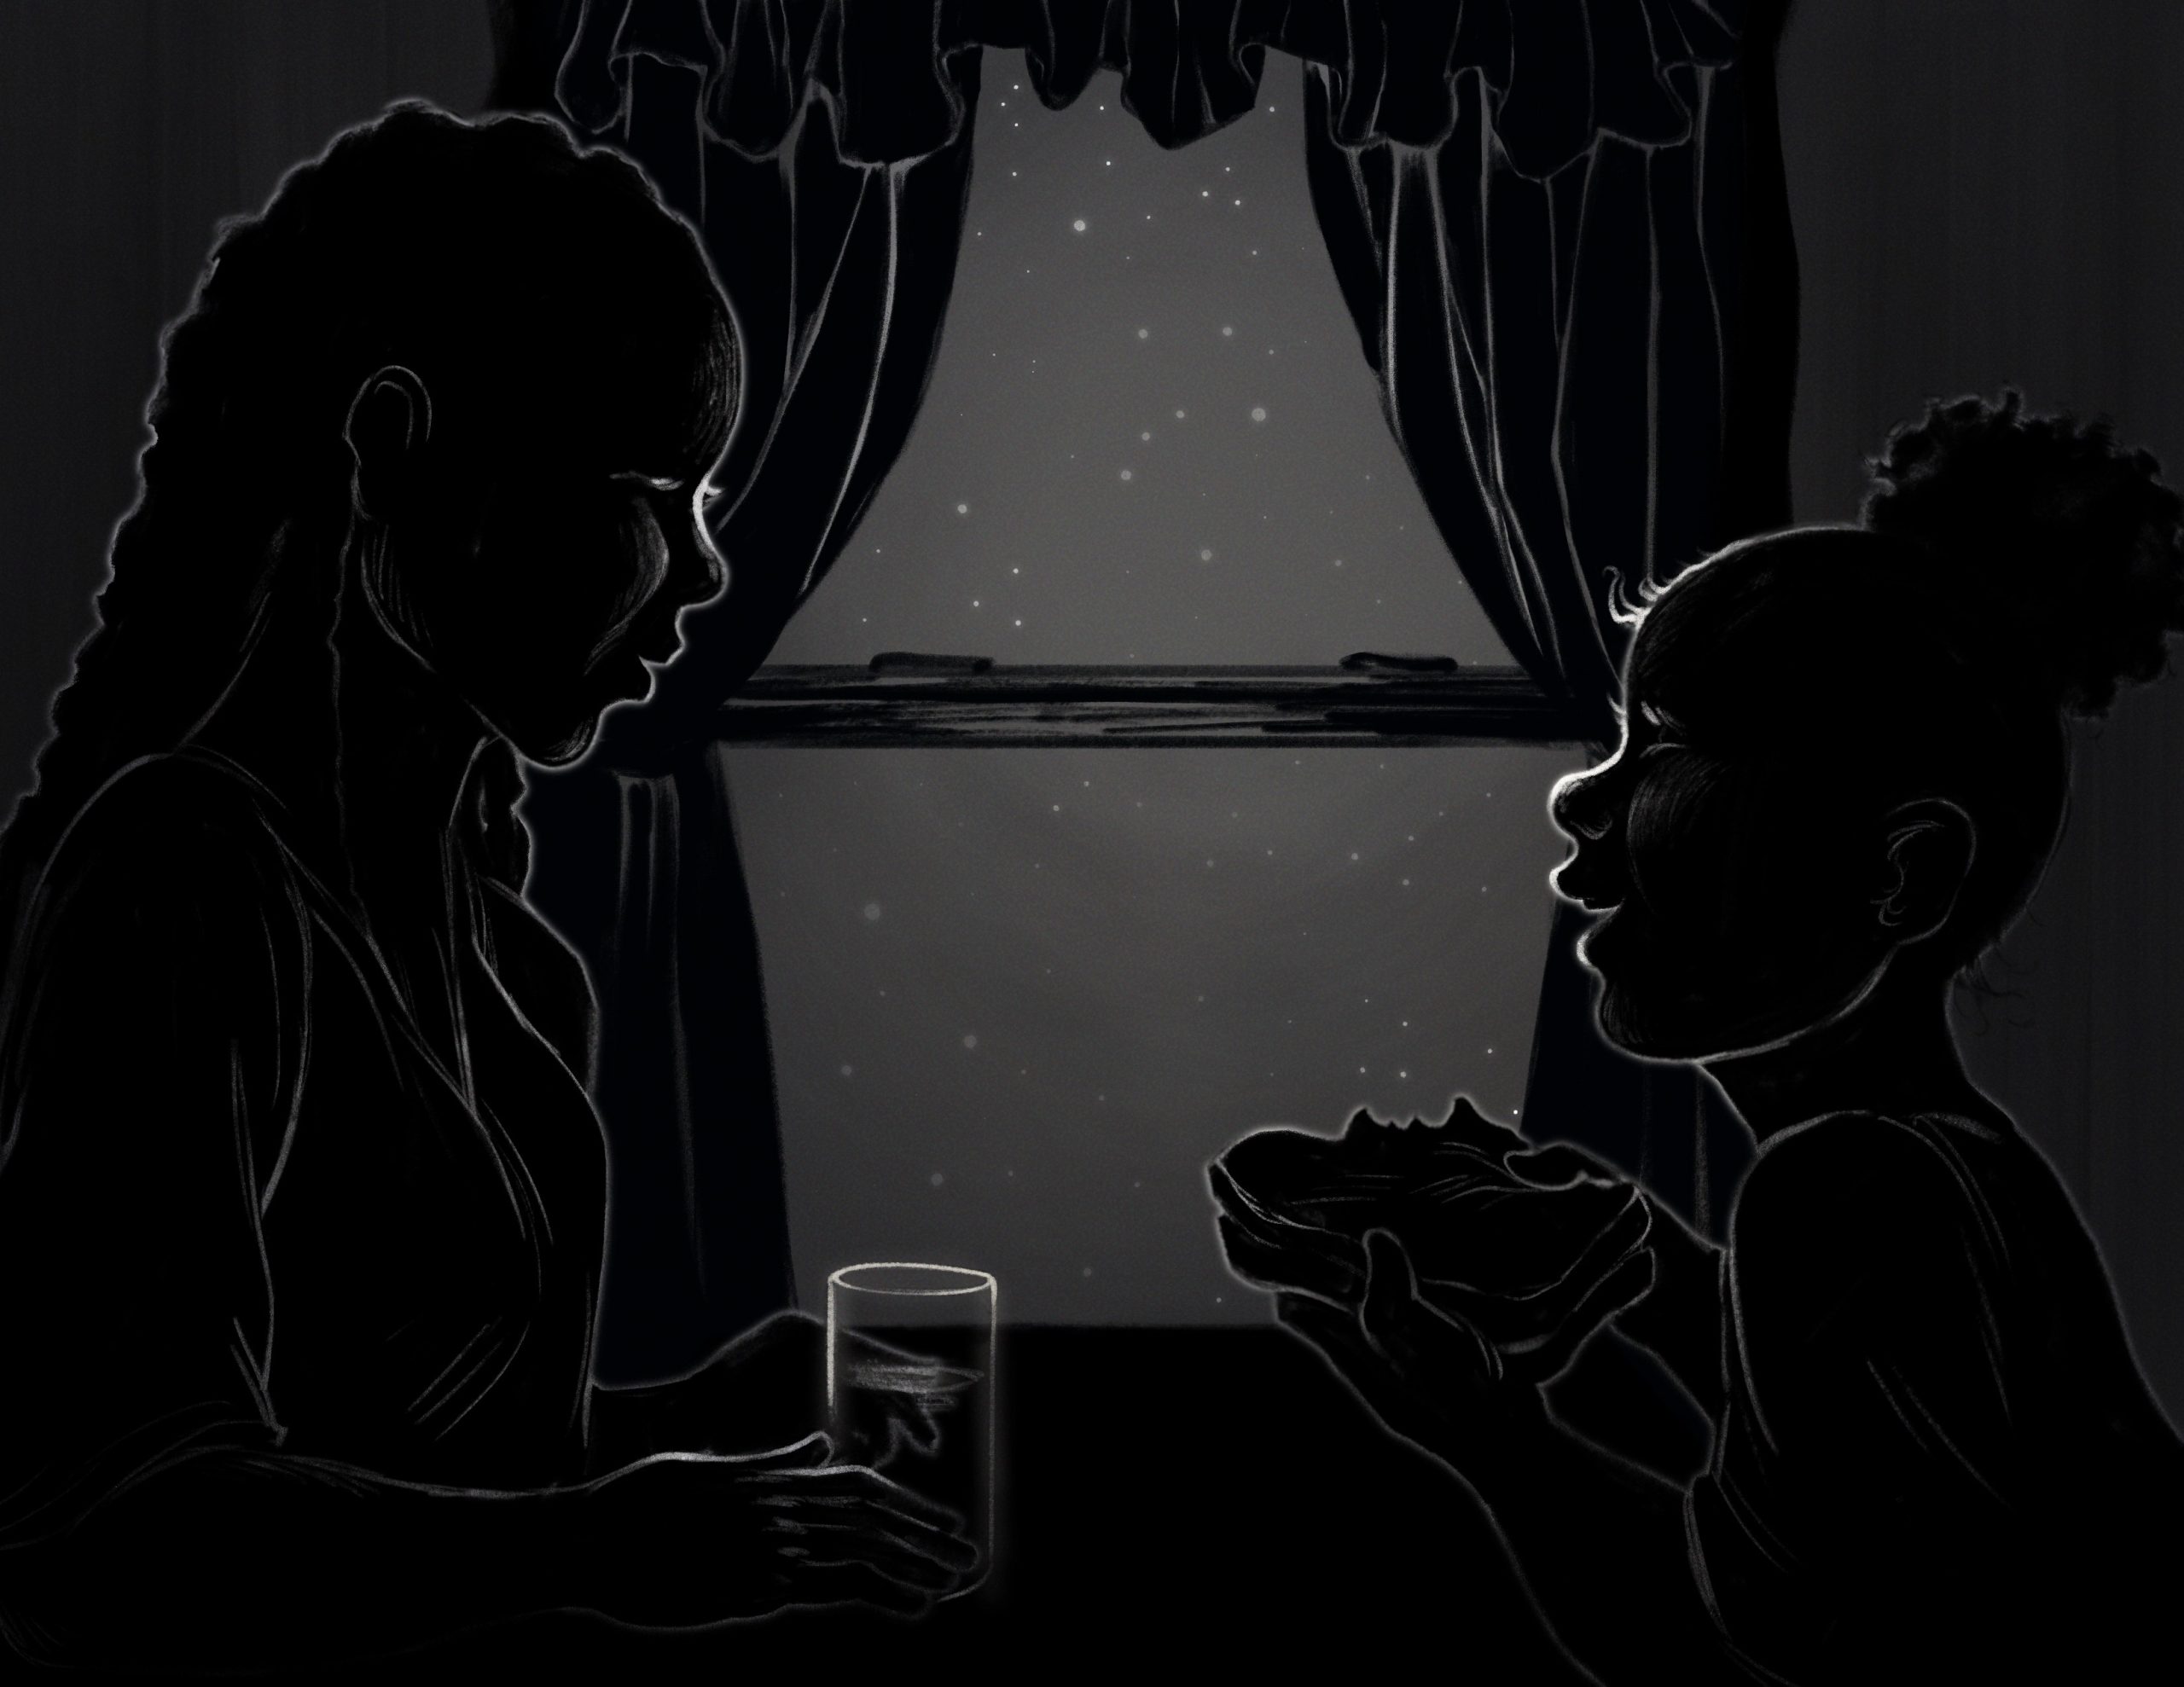 Featured Image: A black and white illustration of two people facing each other while seated at a table. In the background is a window with the curtains tied back, revealing shining stars in the sky. The person on the left with hair pulled back into one long french braid holds onto a glass that is half full of liquid. The person on the right is younger and holds a sandwich with a piece bitten out. They are looking at each other, smiling.Illustration by Aspen Kowsky